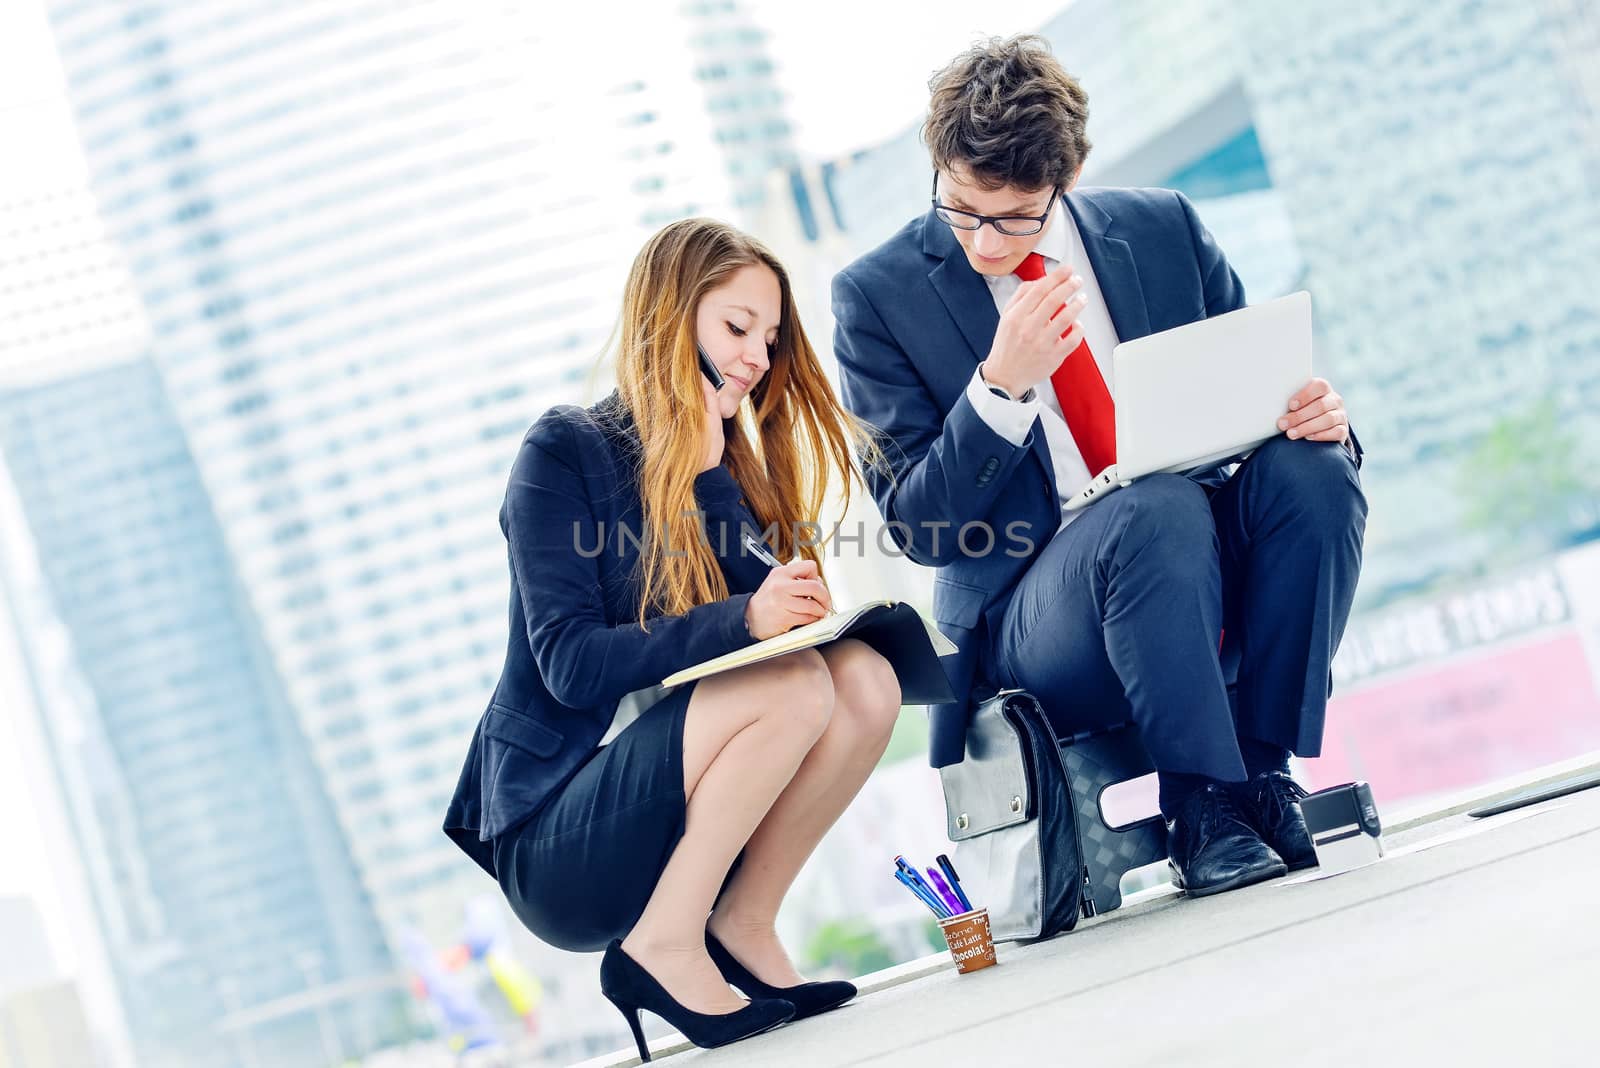 Junior executives dynamics working outside of their office by pixinoo